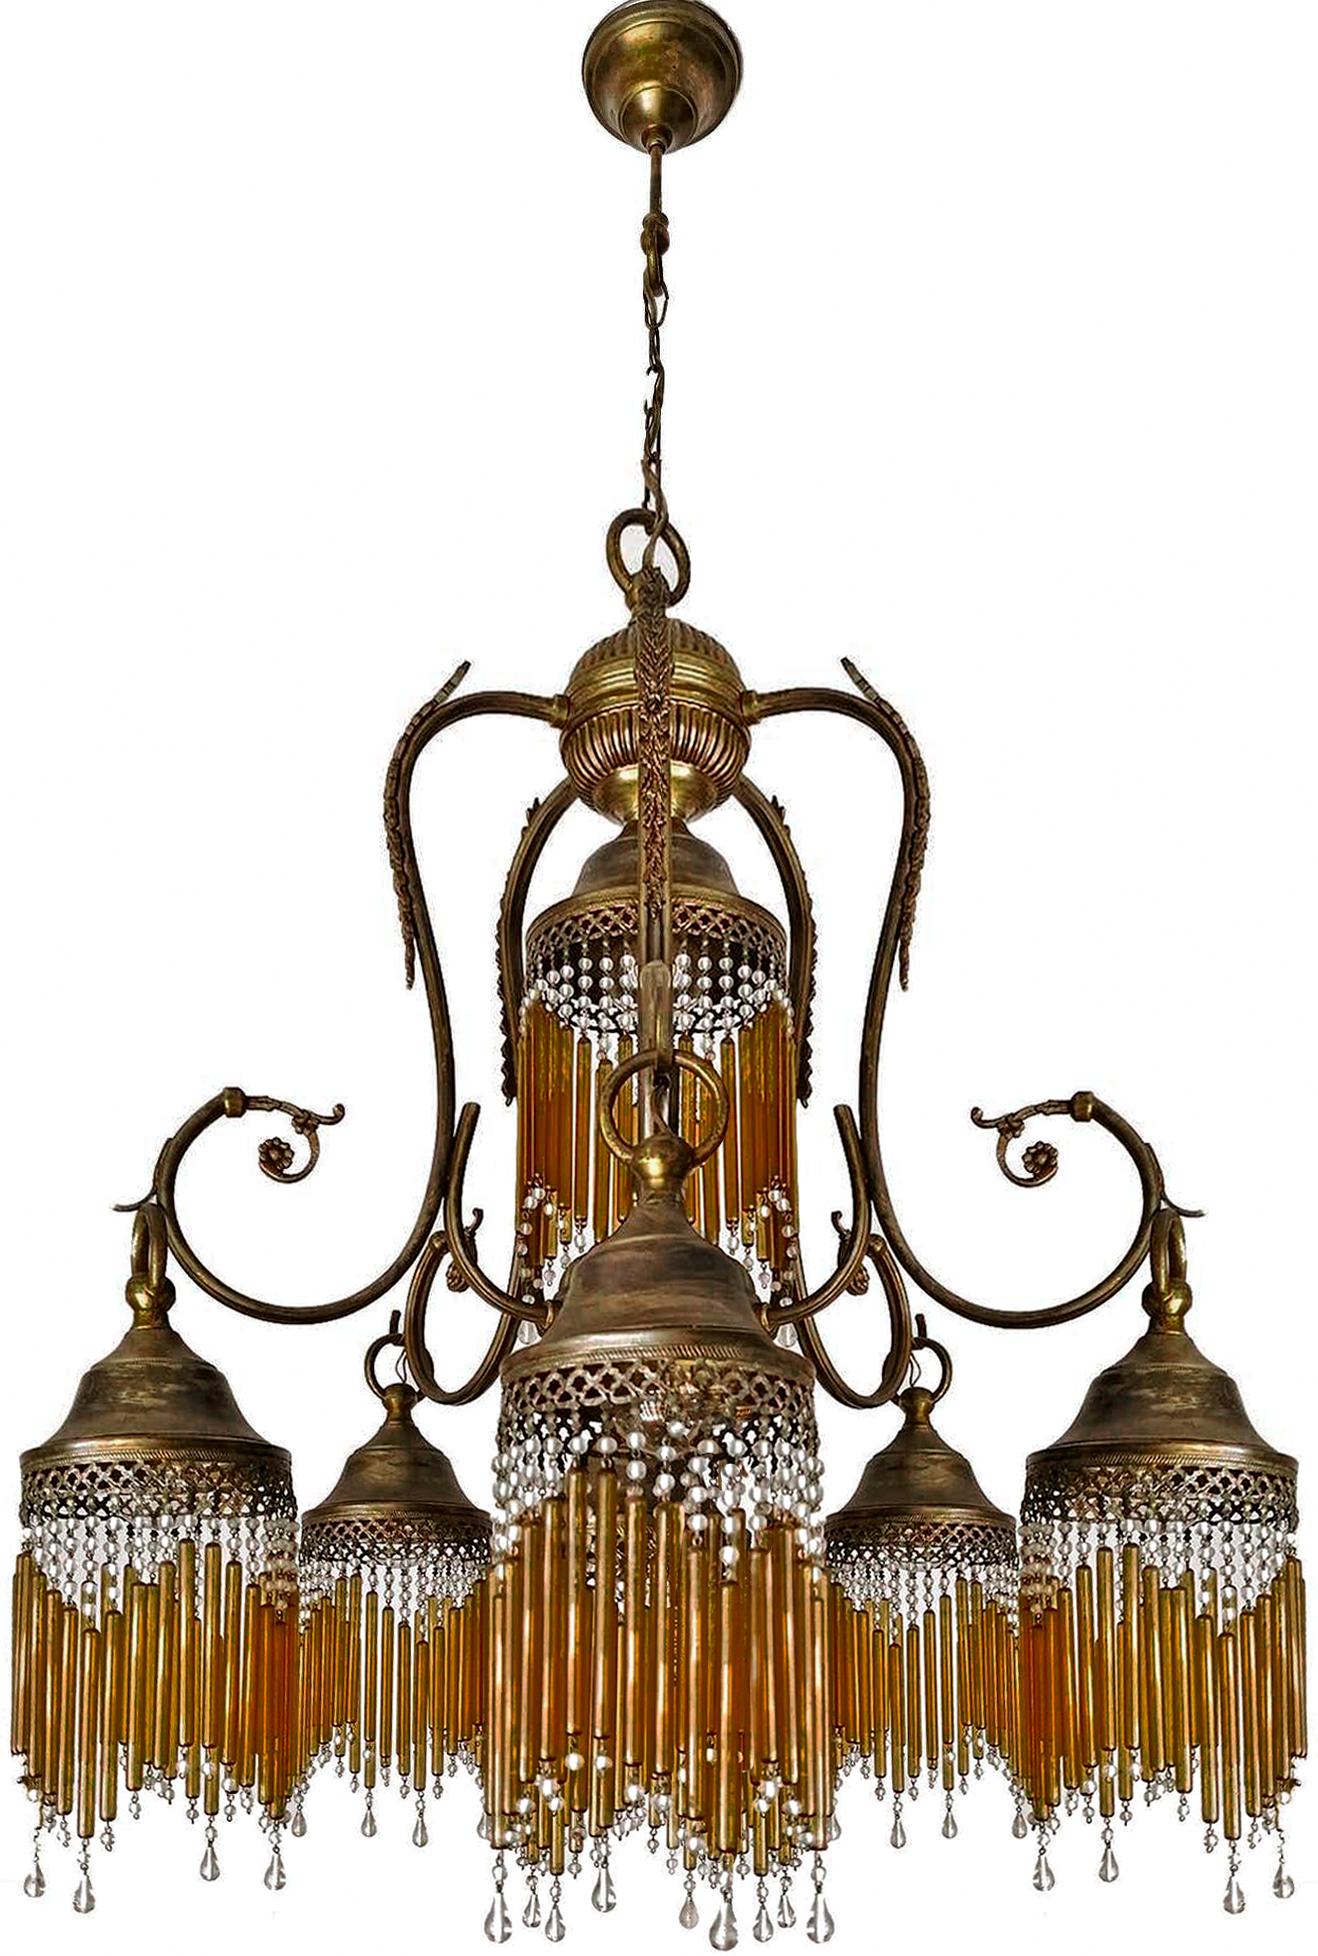 Fabulous early 20th century in clear and amber beaded glass Art Deco or Art Nouveau chandelier.
Dimensions:
Height: 47.25 in/chain=8 in. (120 cm/chain=20 cm)
Diameter: 24.41 in. (62 cm) 
7 light bulbs E14/ good working condition/European